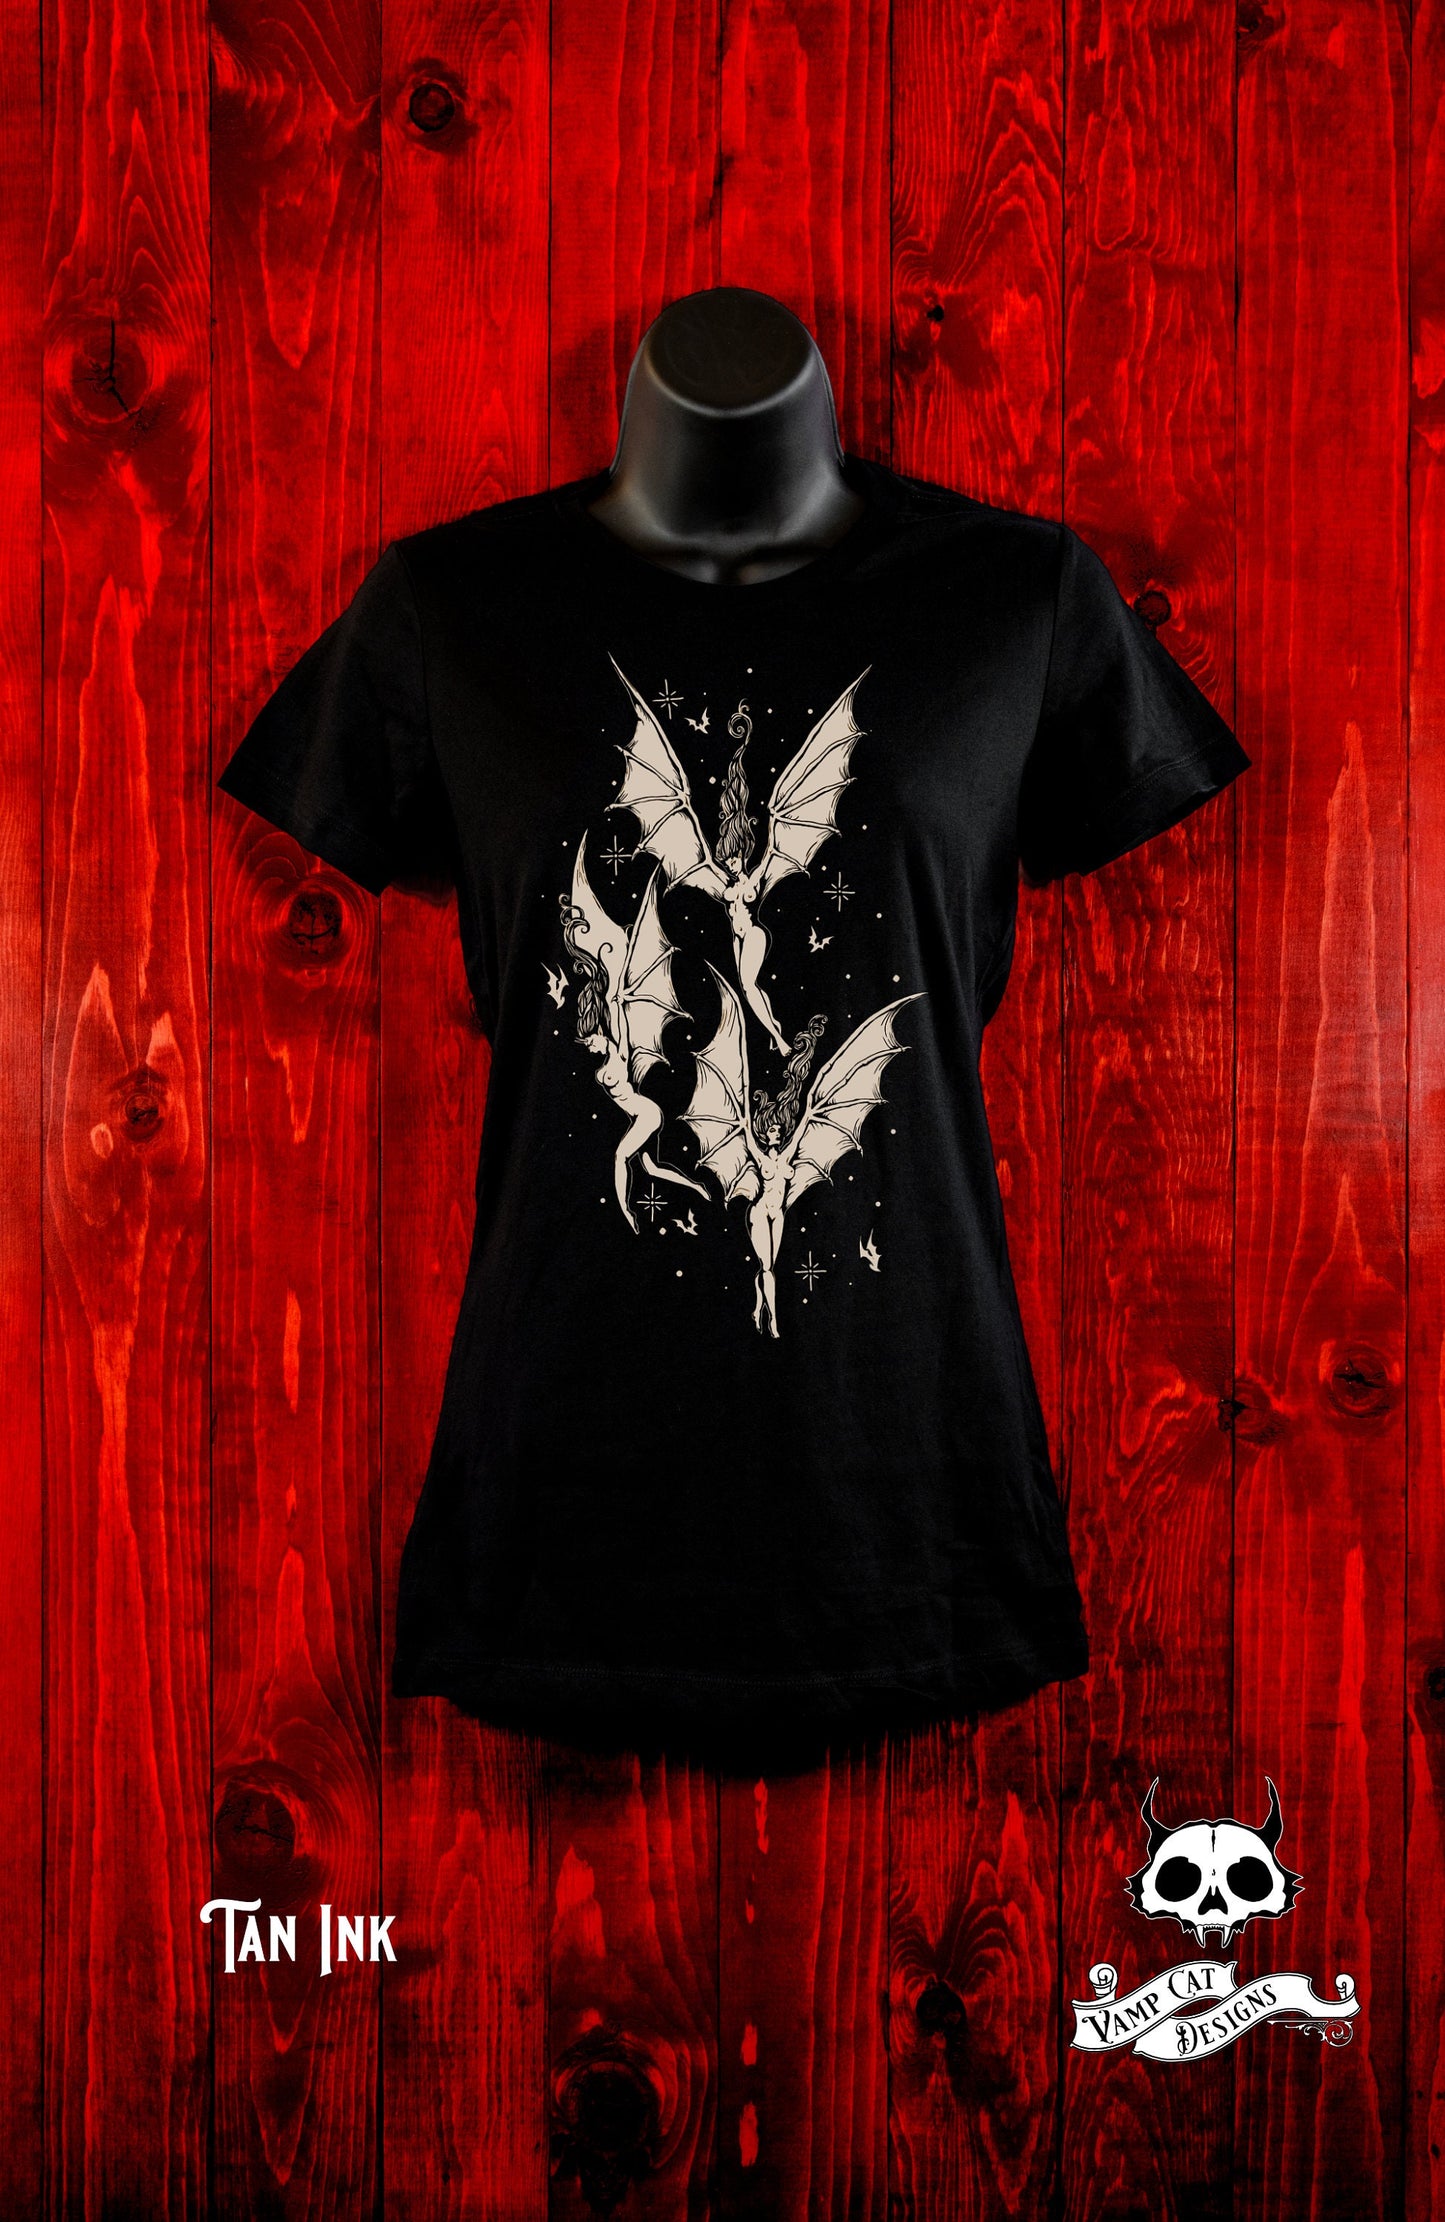 Flight Of The Succubus-Women's Tee-Folklore Art-Dark Apparel-Witchy Tee-Women's Top-Gothic Tee-Female Demons-Succubus Art Tee